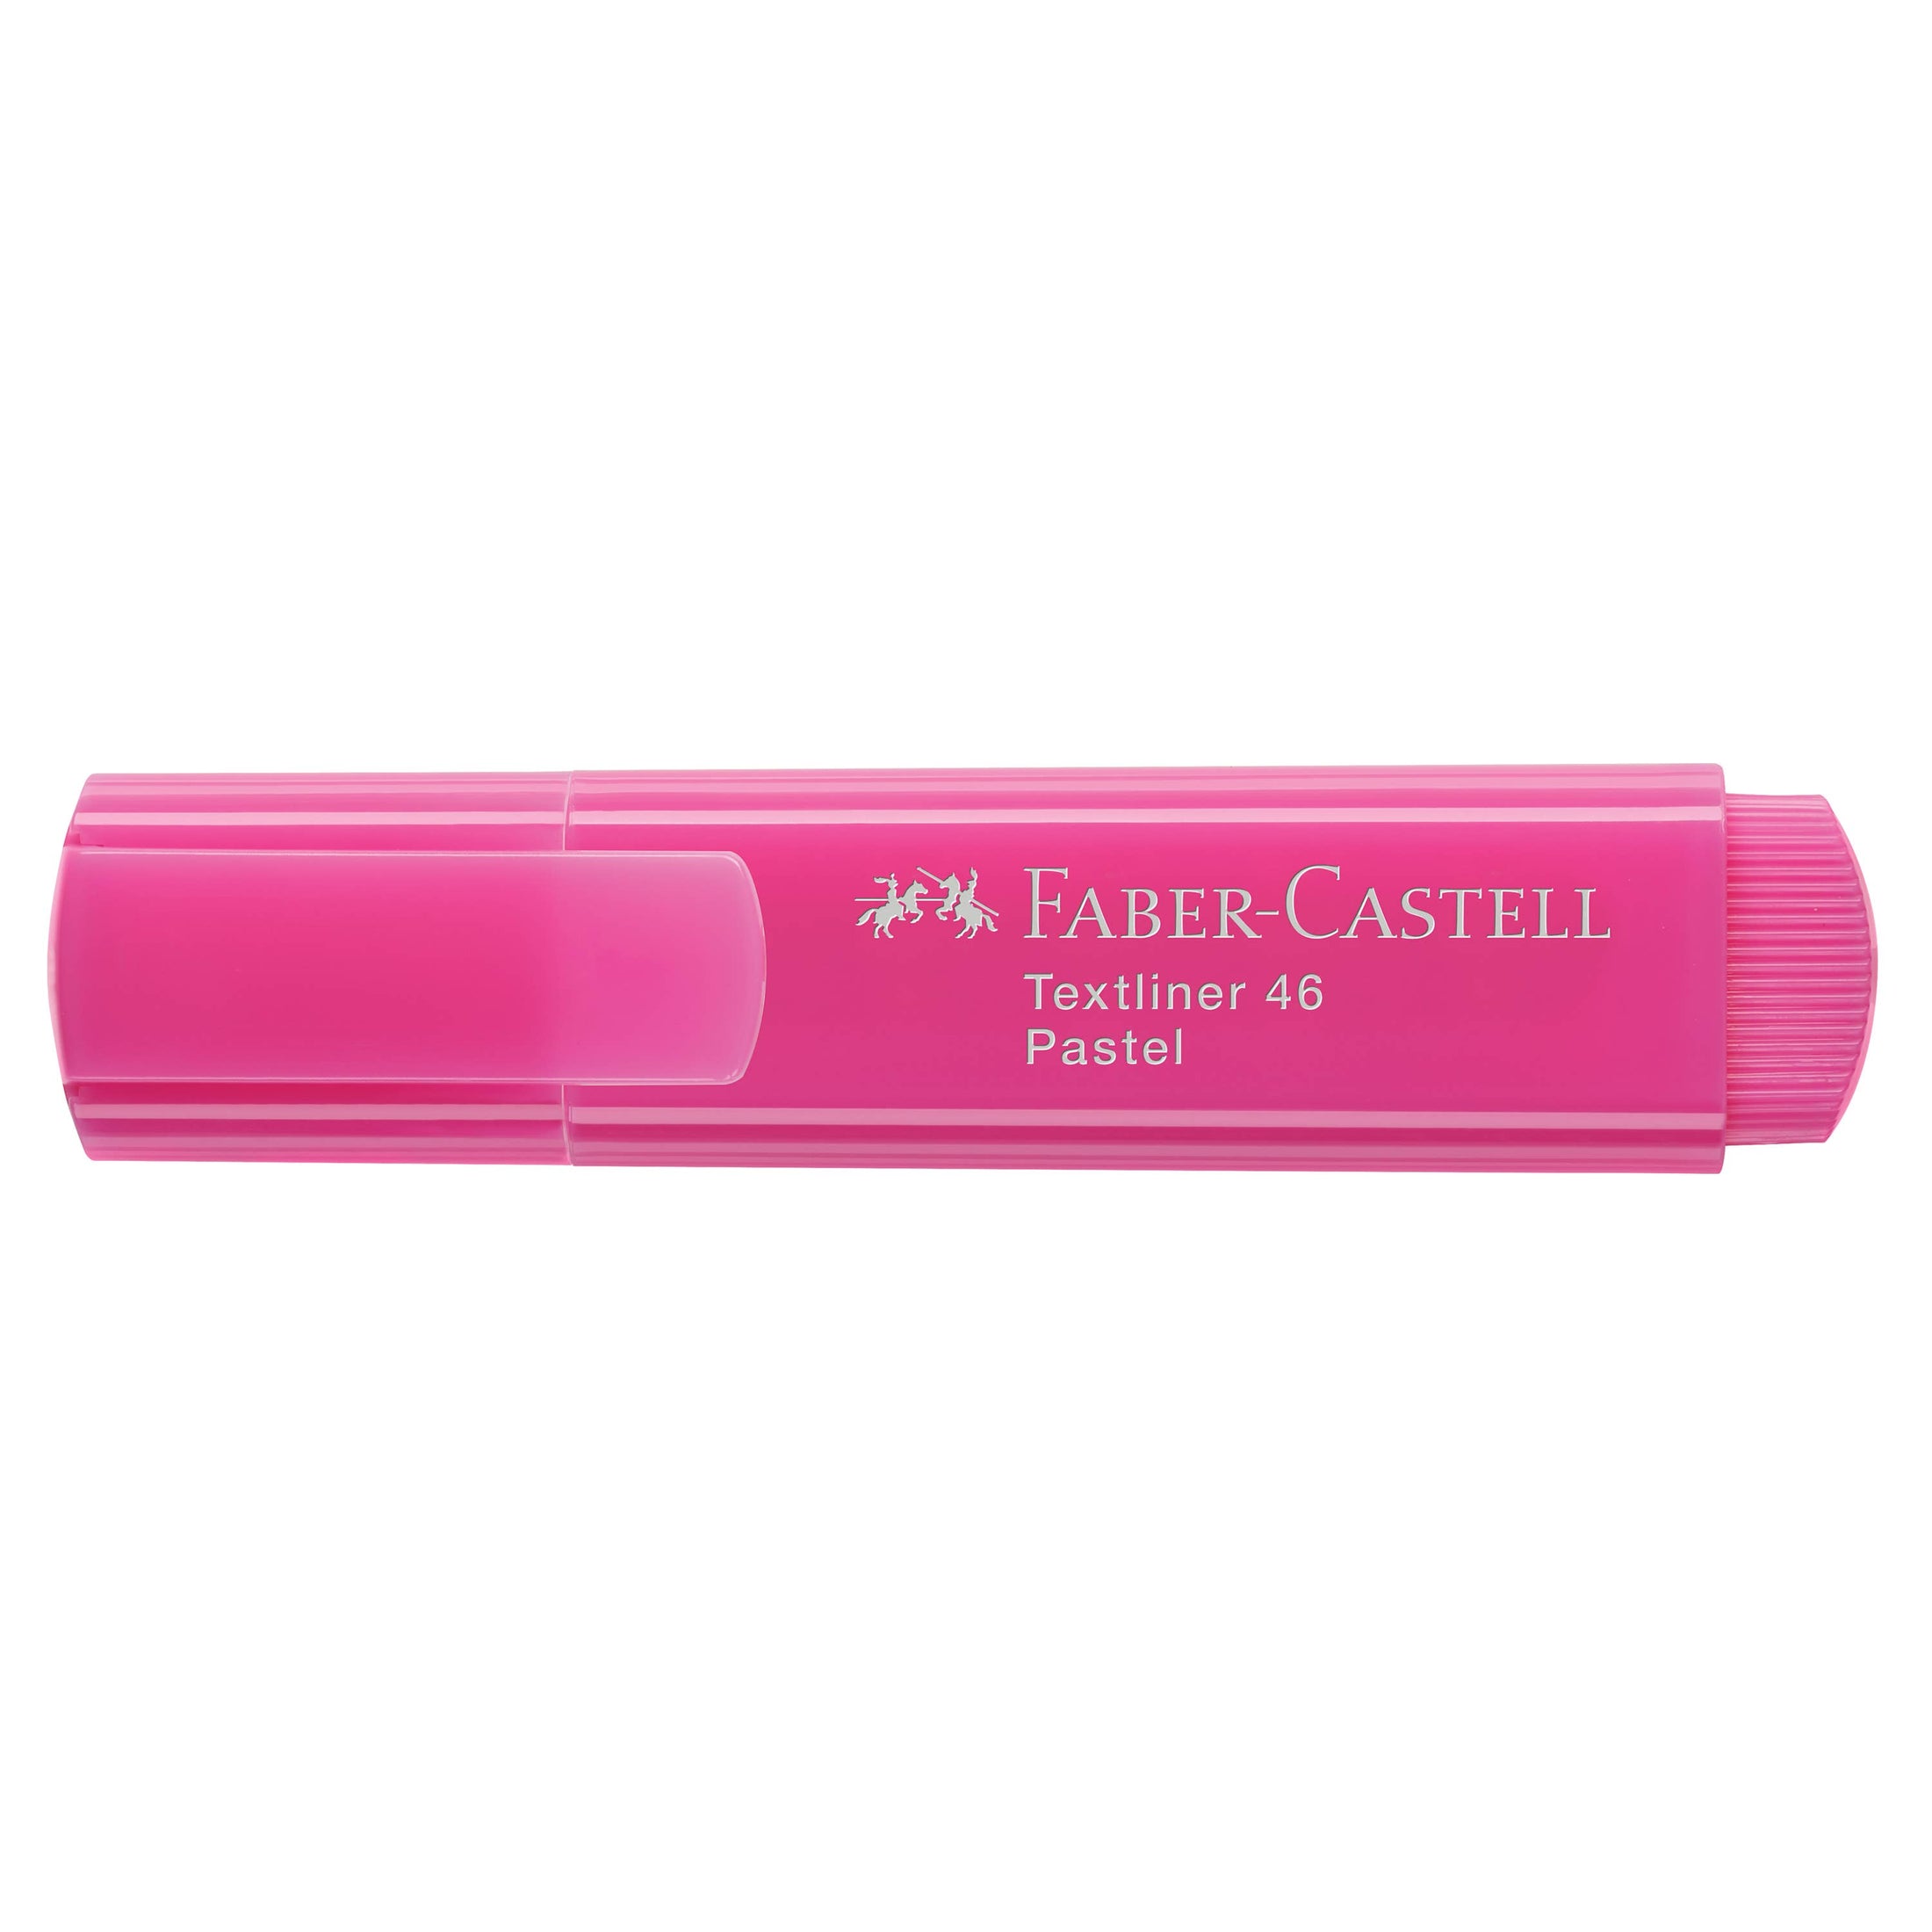 FABER-CASTELL: Highlighters, Pastel (8)